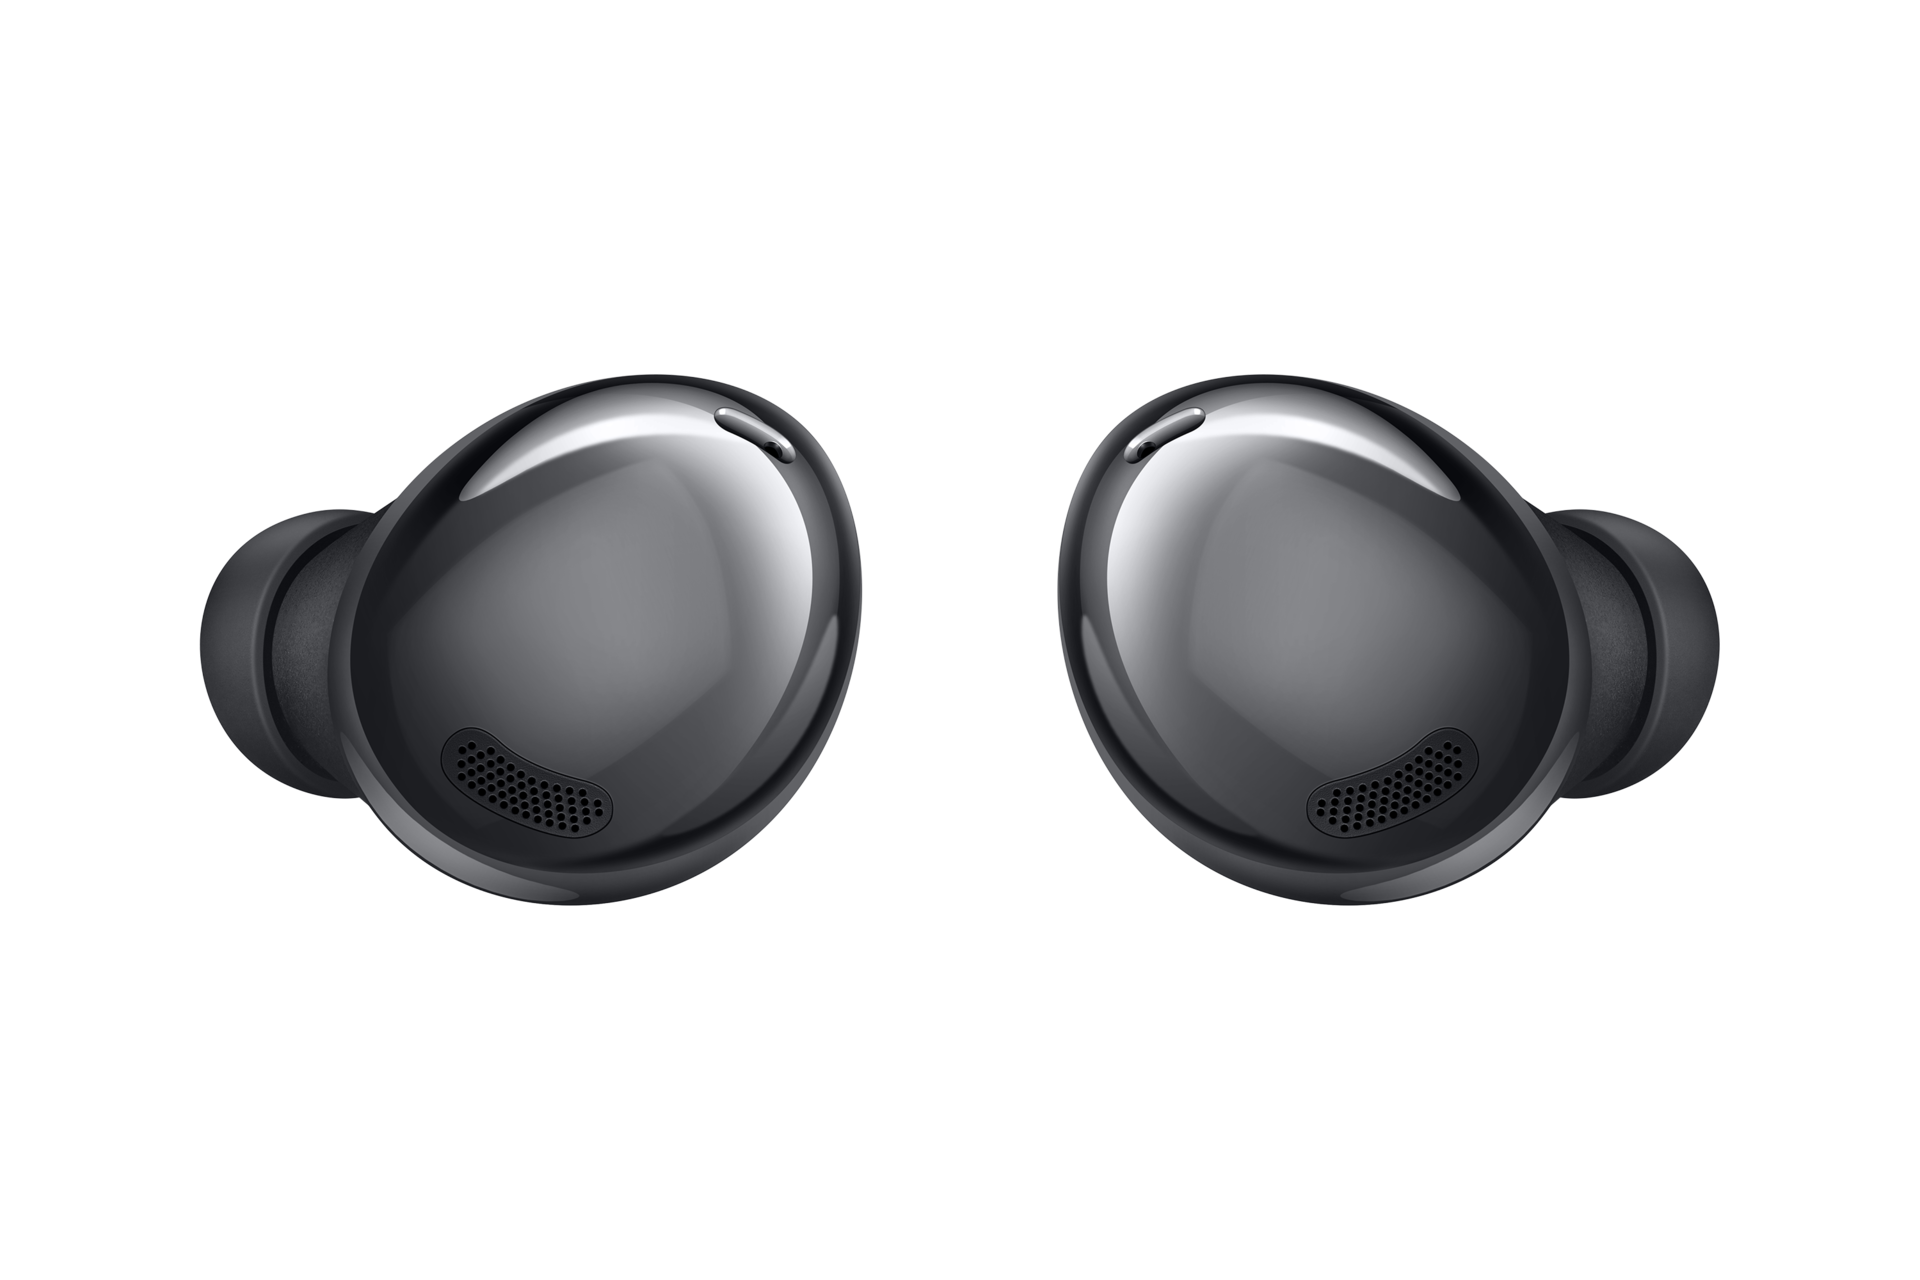 Galaxy Buds Pro (新品未使用品)イヤフォン - イヤフォン